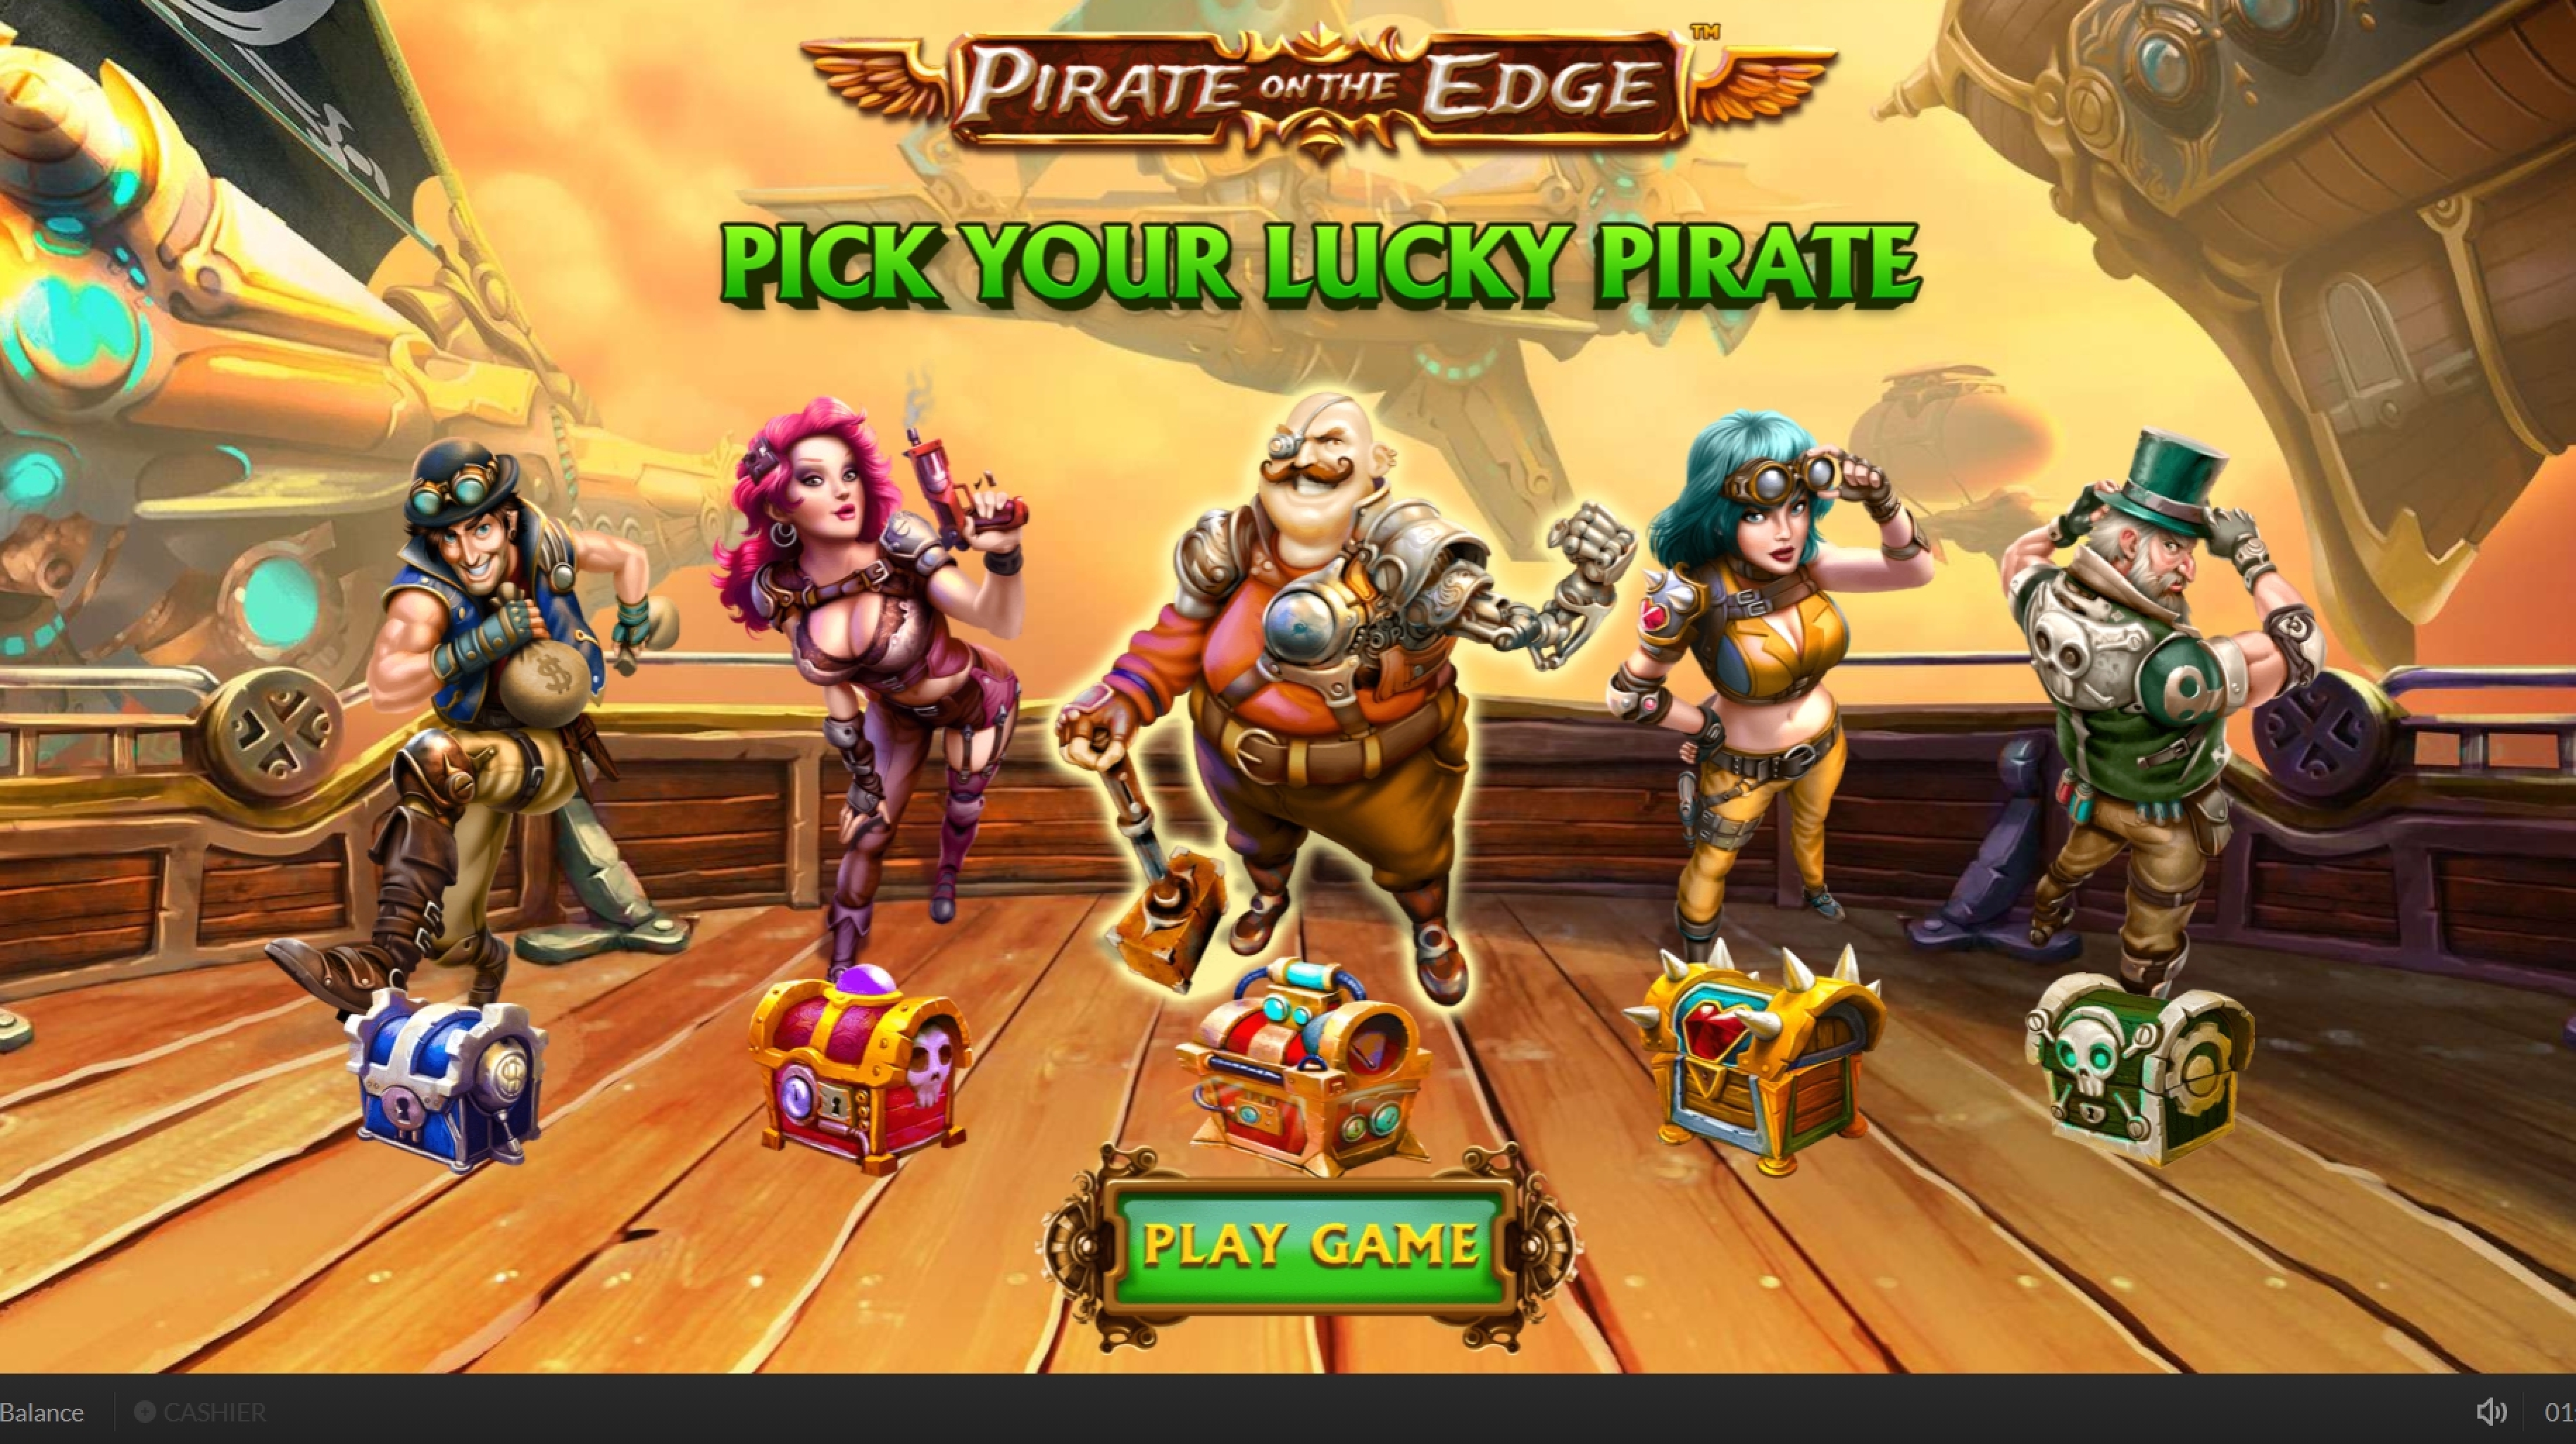 Play Pirate on the Edge Free Casino Slot Game by Skywind